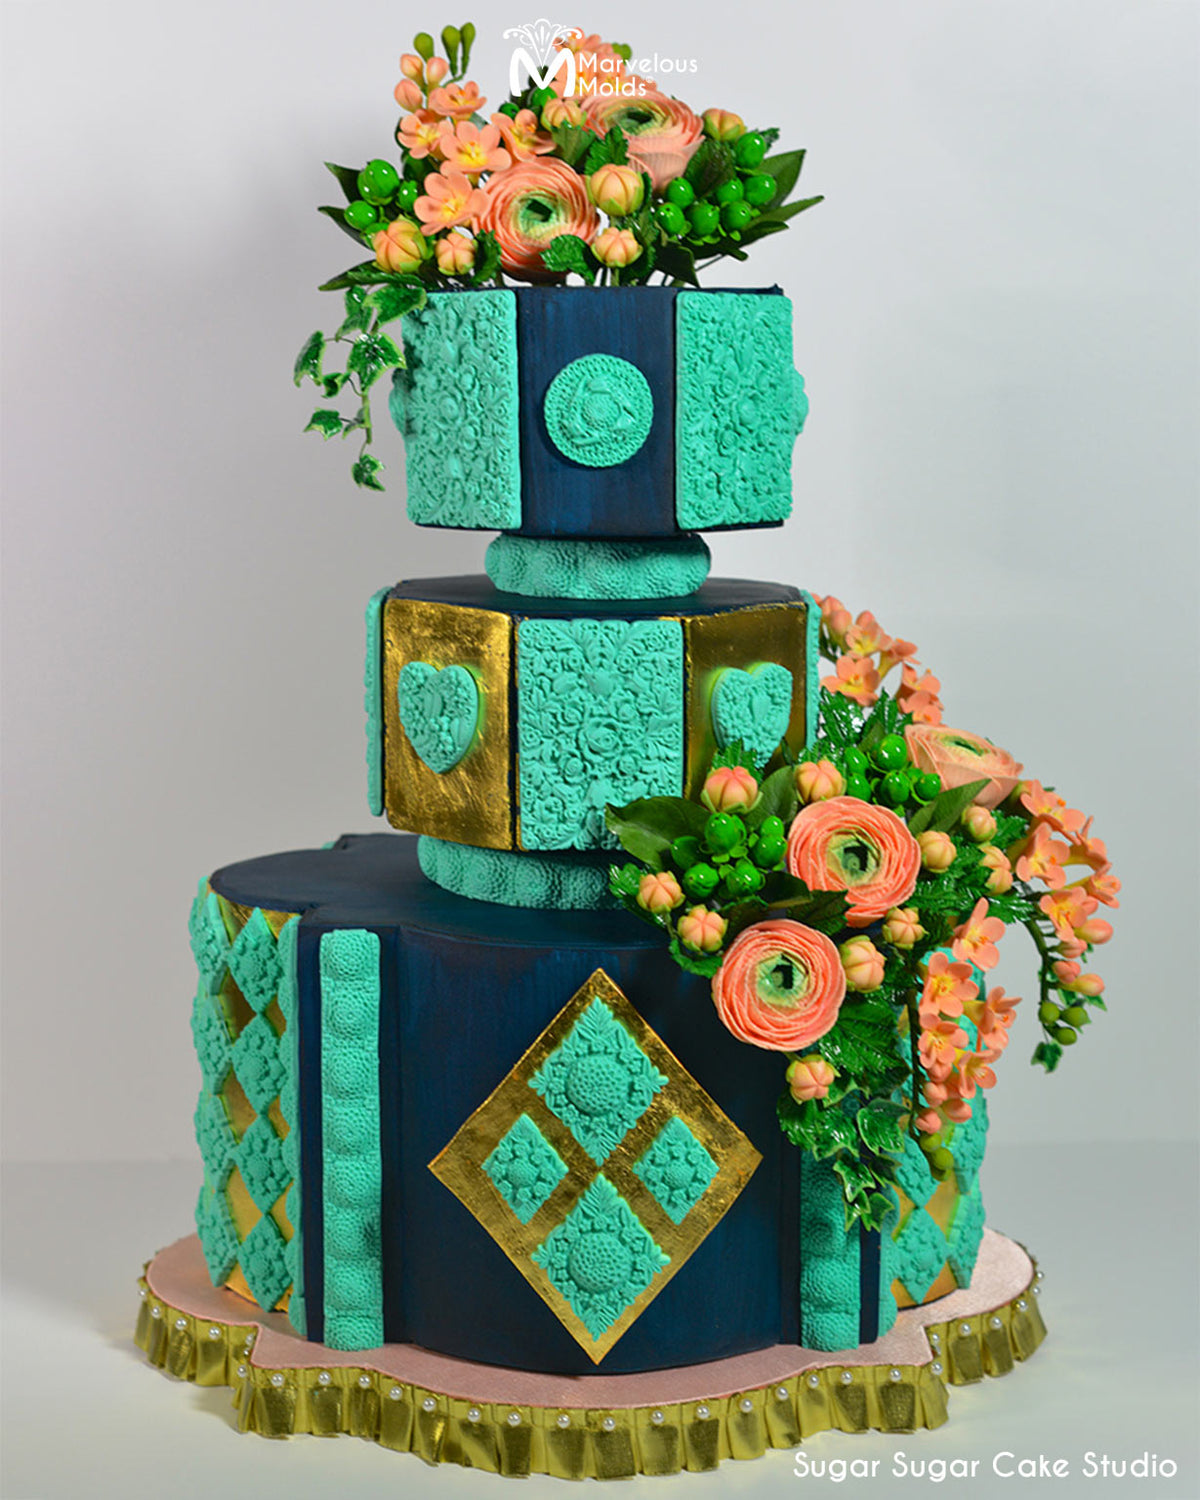 Turquoise and Coral Colored Cake with Floral Decorations Created with the Marvelous Molds Royal Garden Madrigal Medallion Silicone Mold